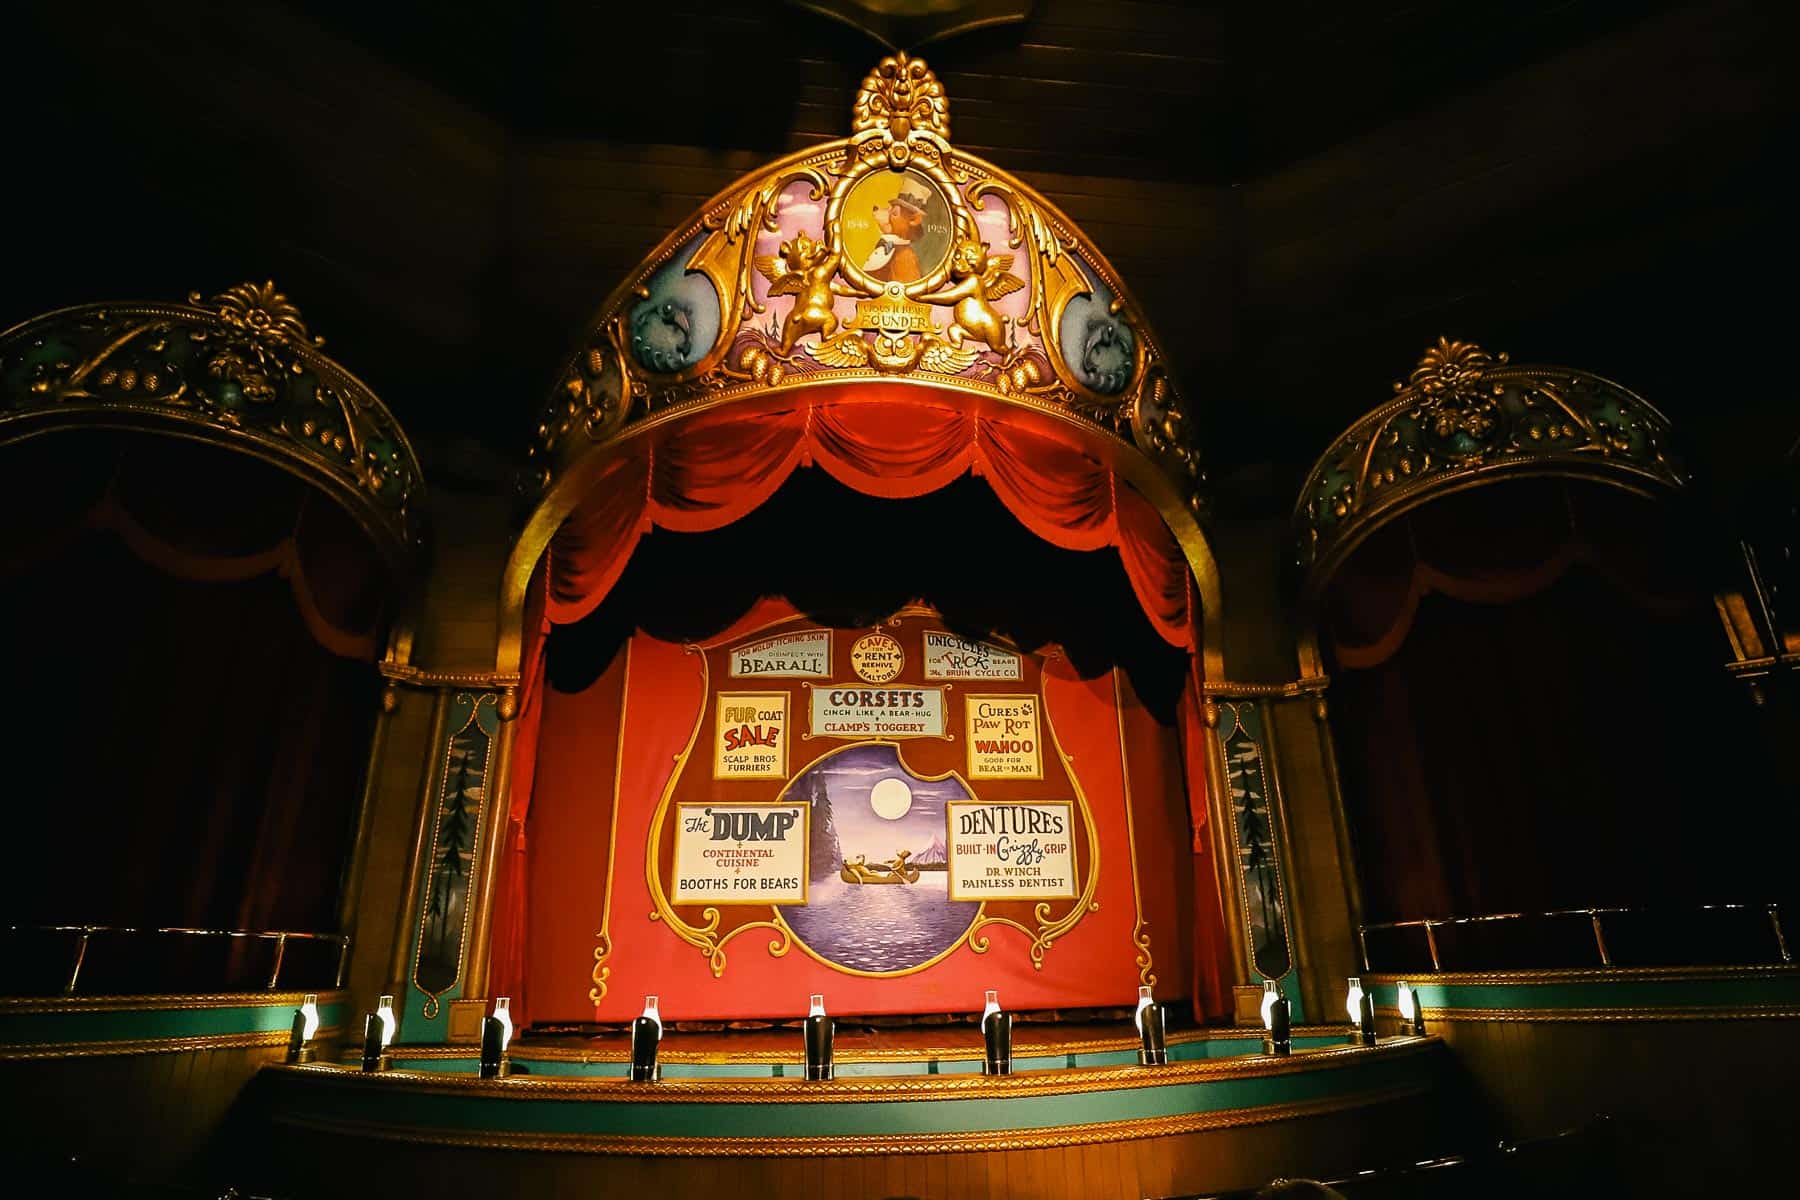 The stage of the Country Bear Jamboree with posters advertising the acts.